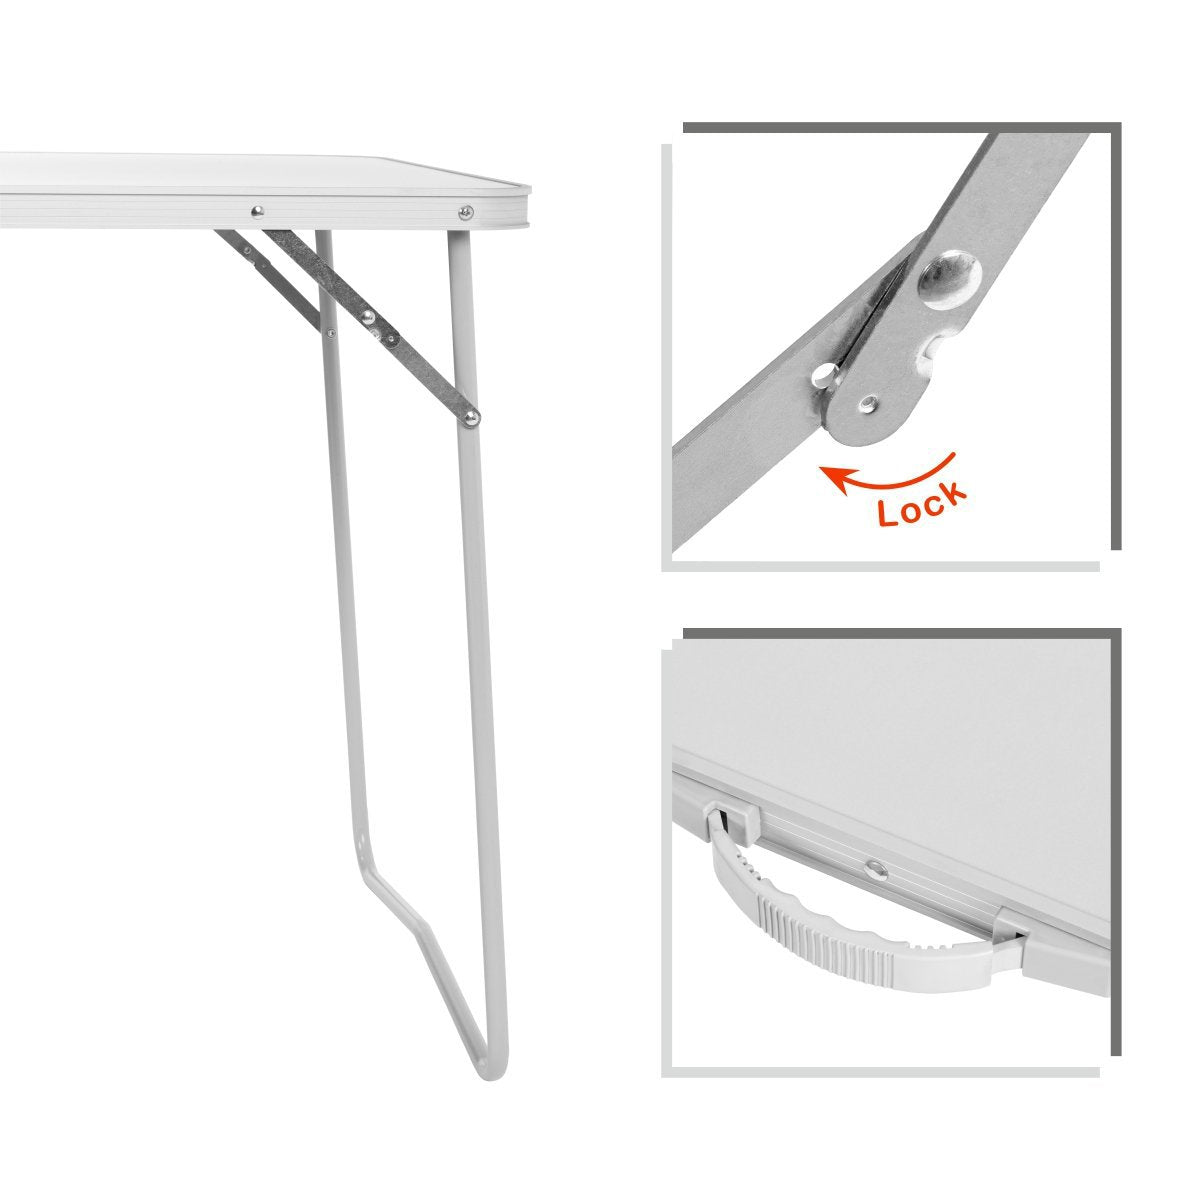 Portable Lightweight Steel Folding Outdoor Table is easily folding